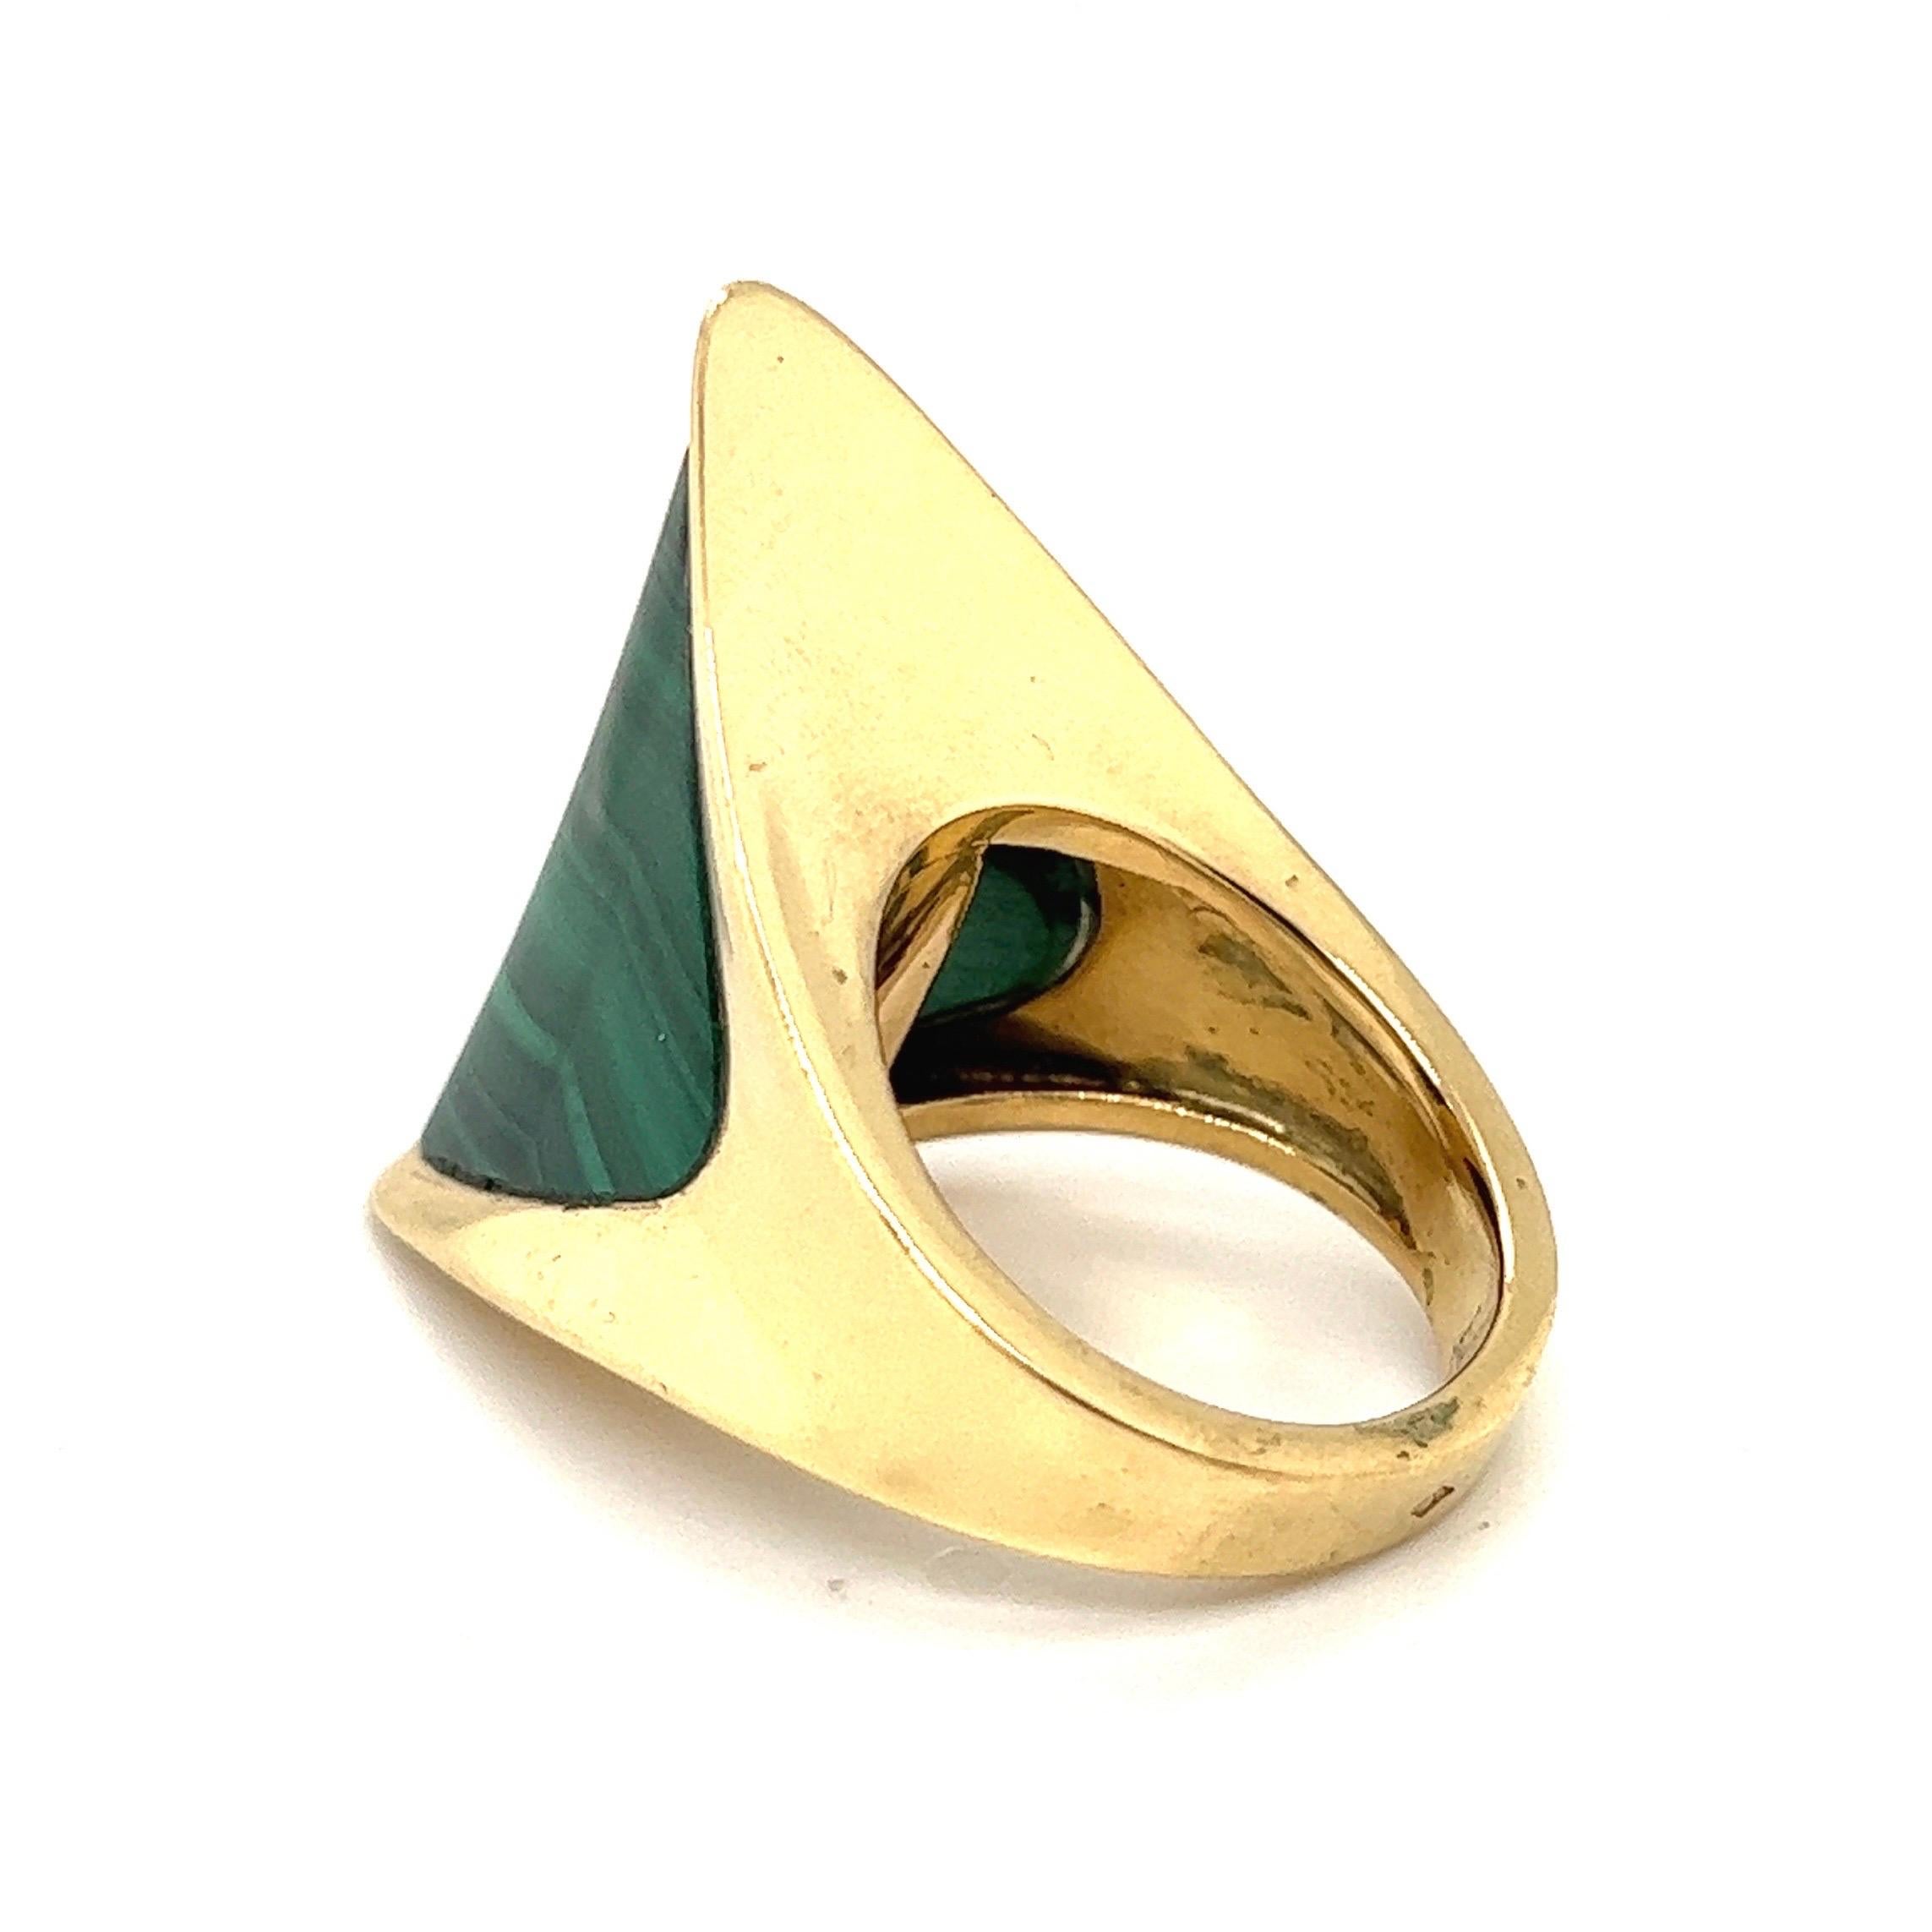 Modernist Piaget 18 Karat Yellow Gold and Malachite Cocktail Ring, circa 1970s For Sale